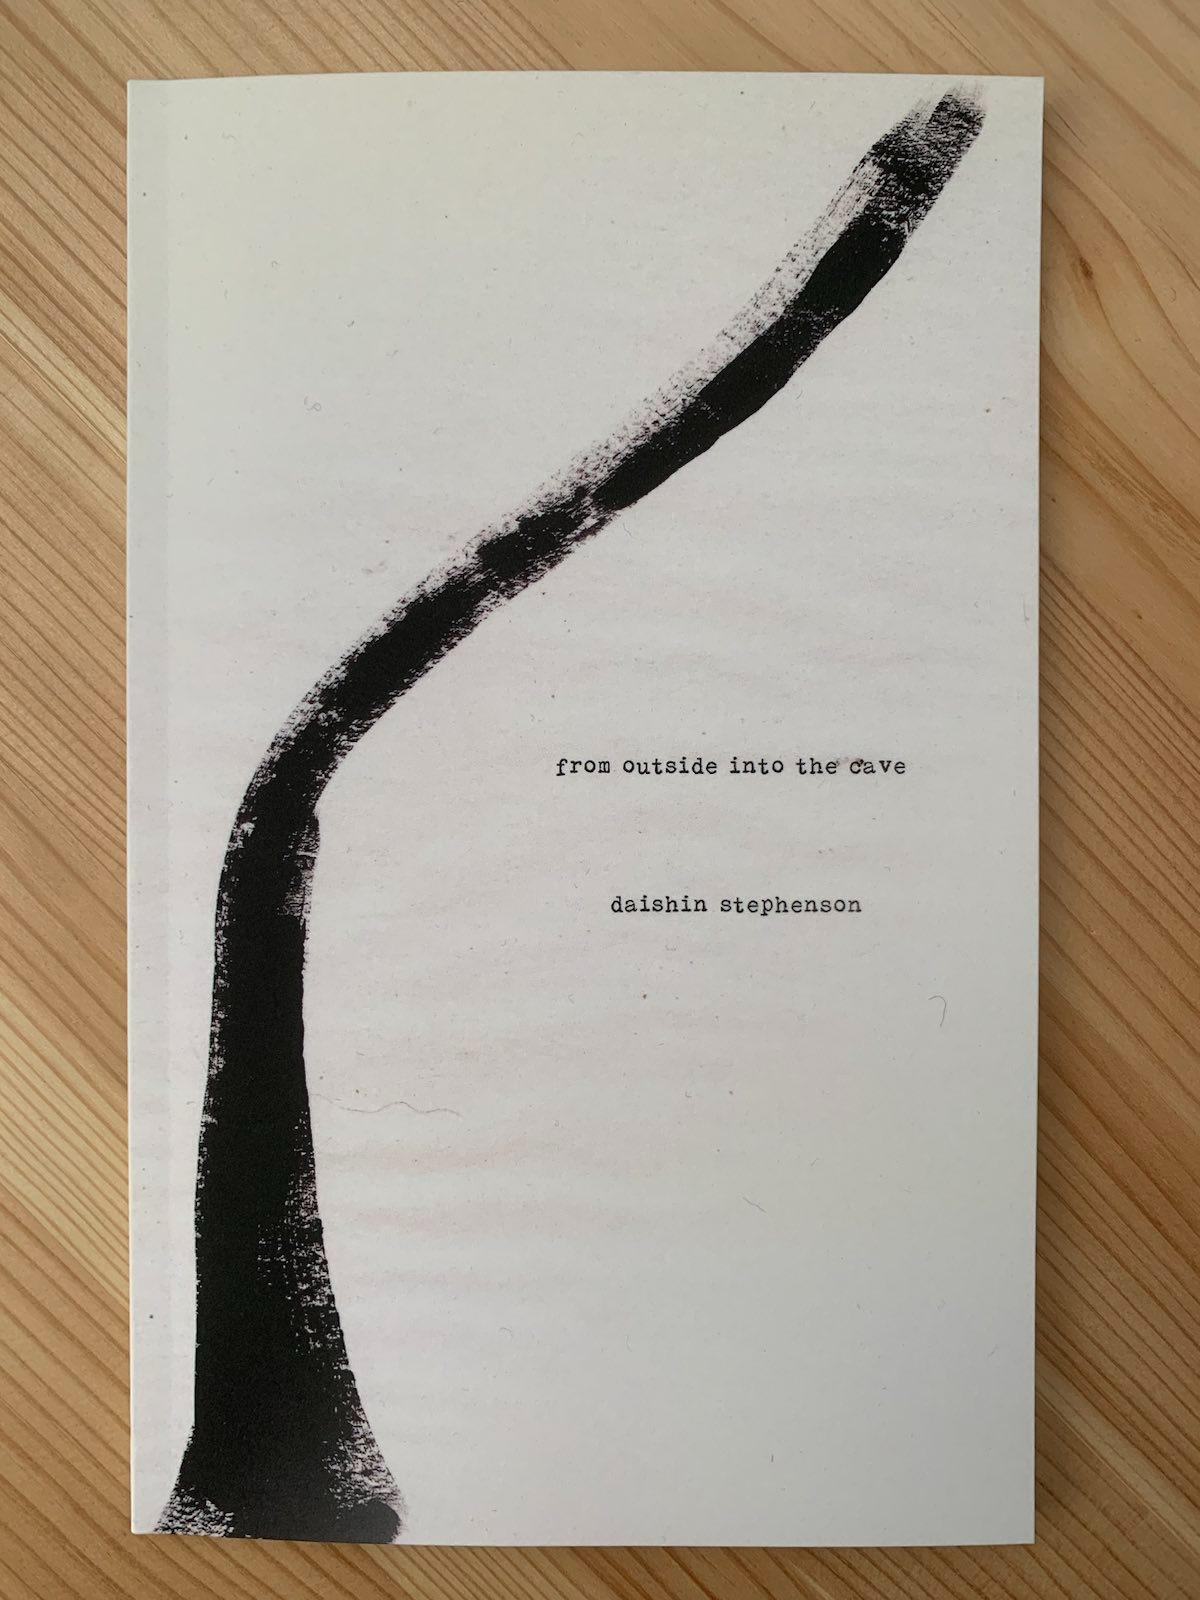 photograph of book. book cover art: off-white background. painting of branchless tree trunk. middle of the cover sits the title 'from outside into the cave'. an inch or so below the title is the author's name, daishin stephenson.